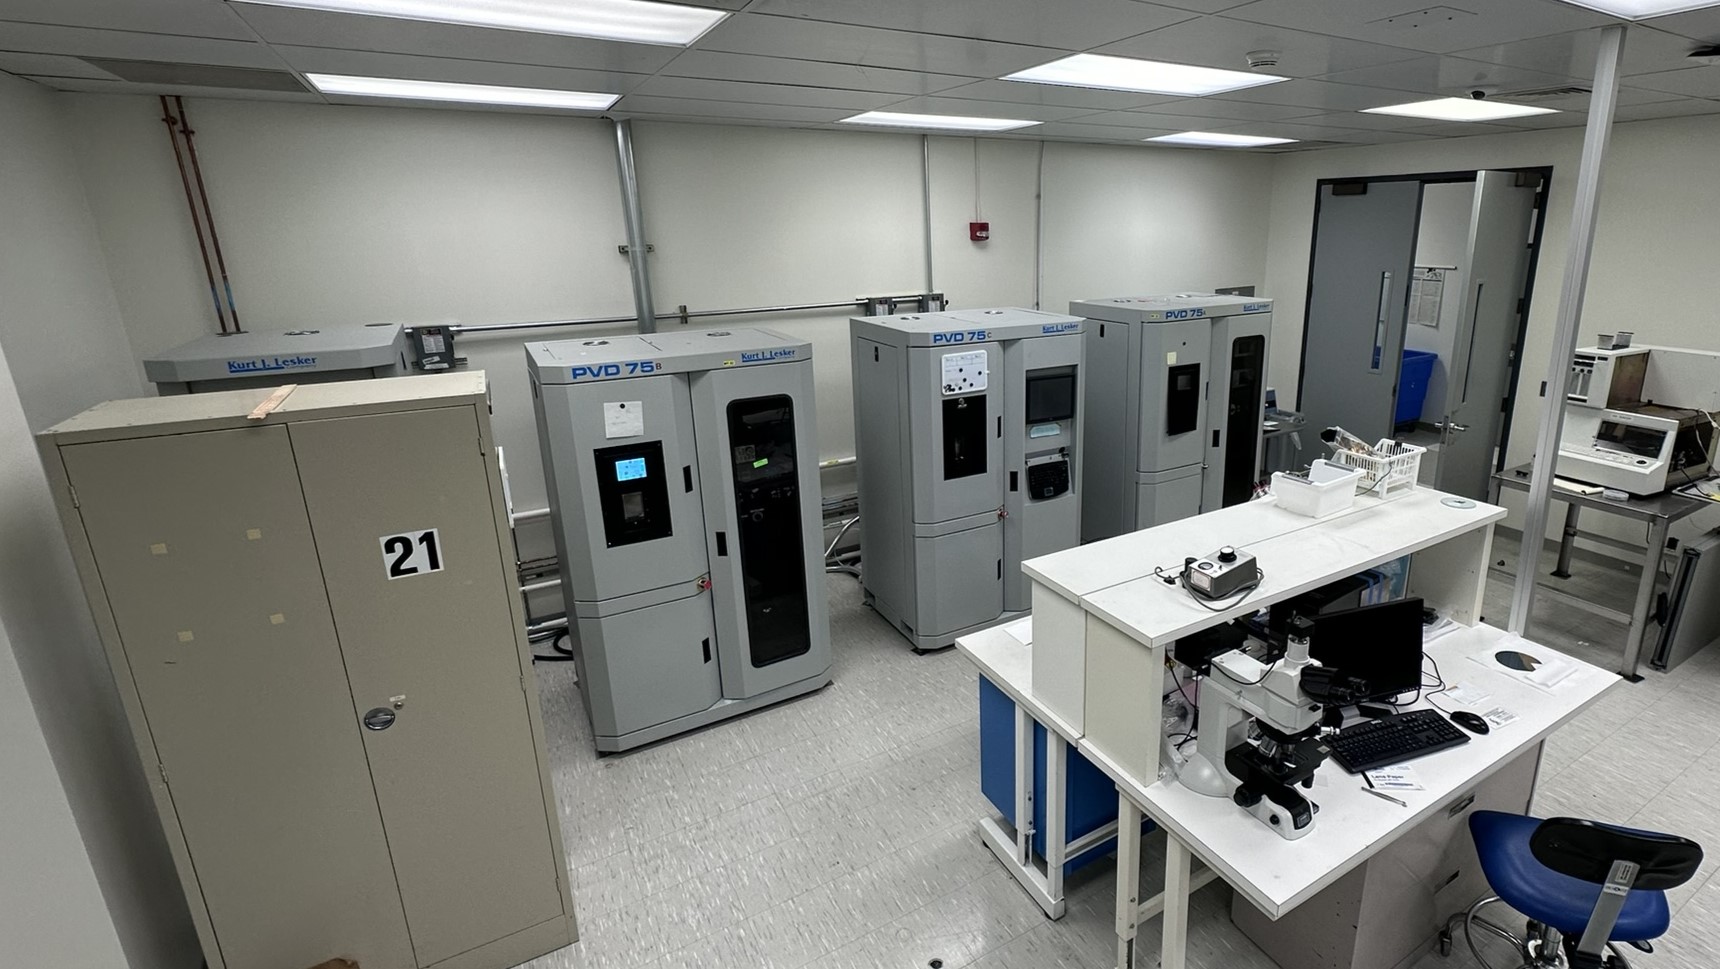 Overhead View of the Physical Vapor Deposition lab equipment